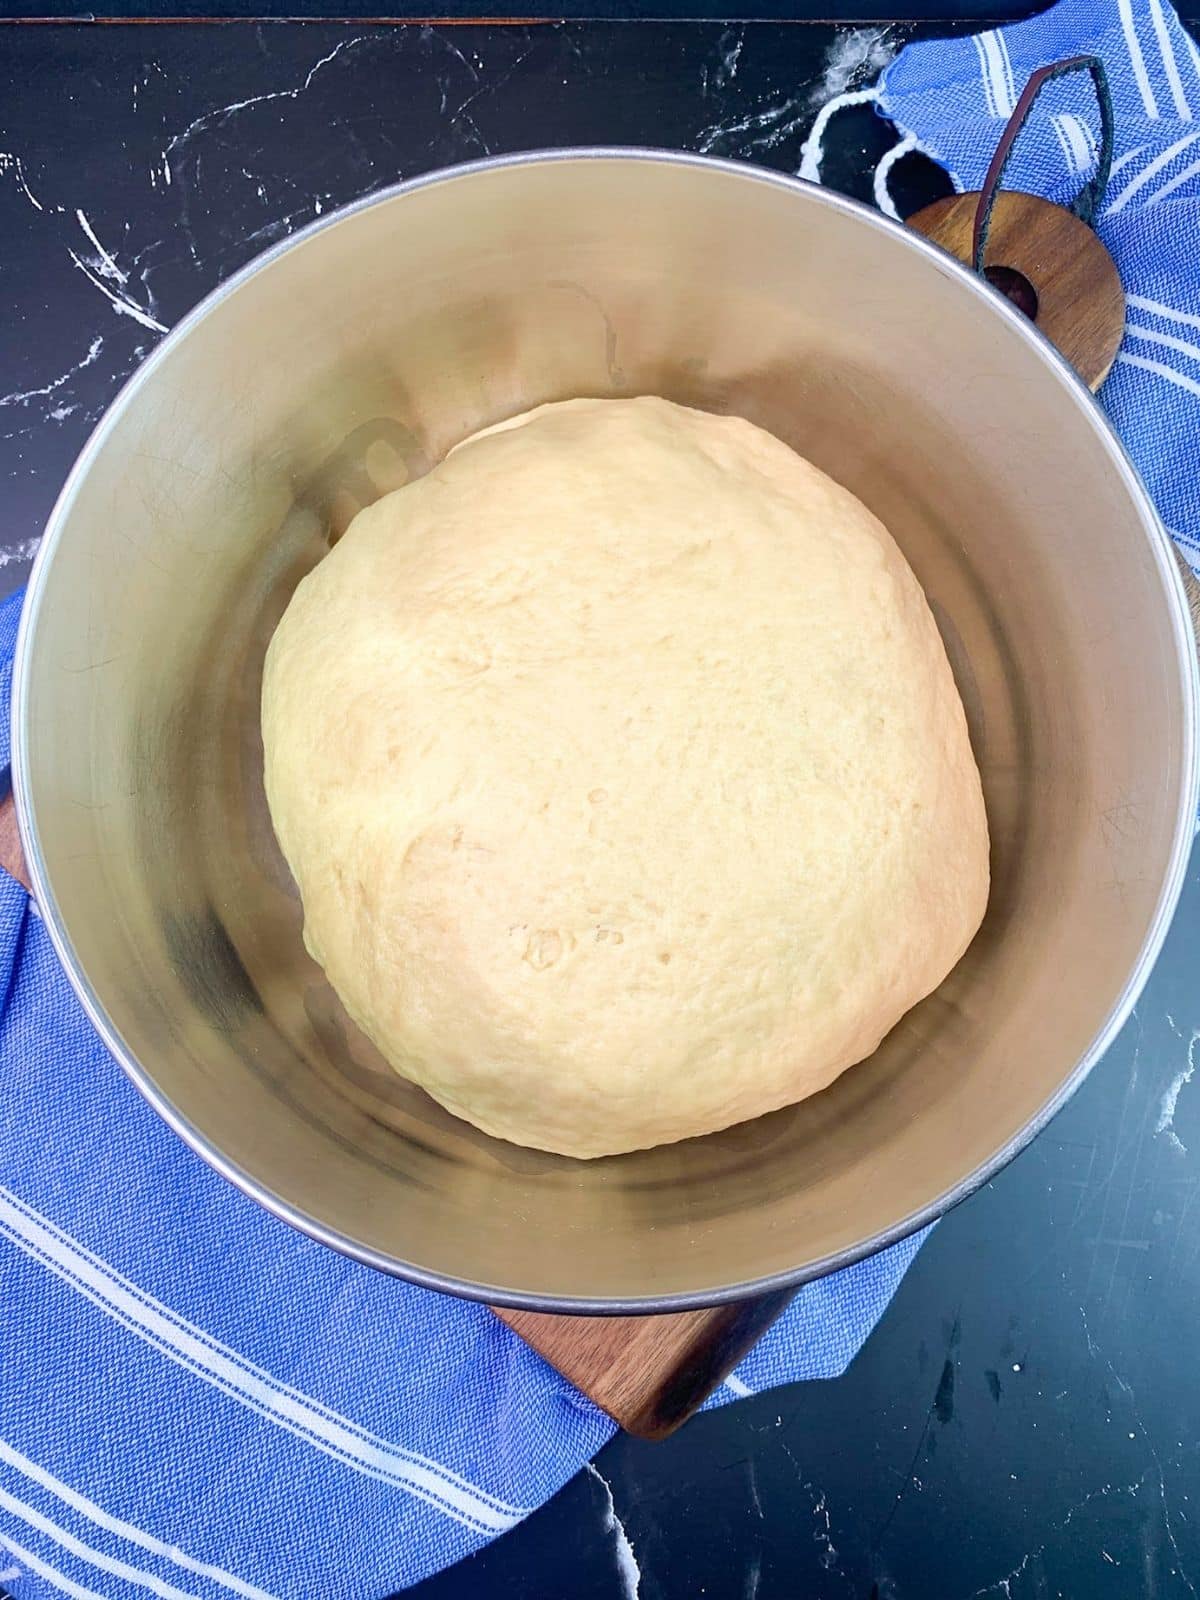 kneaded bread dough in mixing bowl.